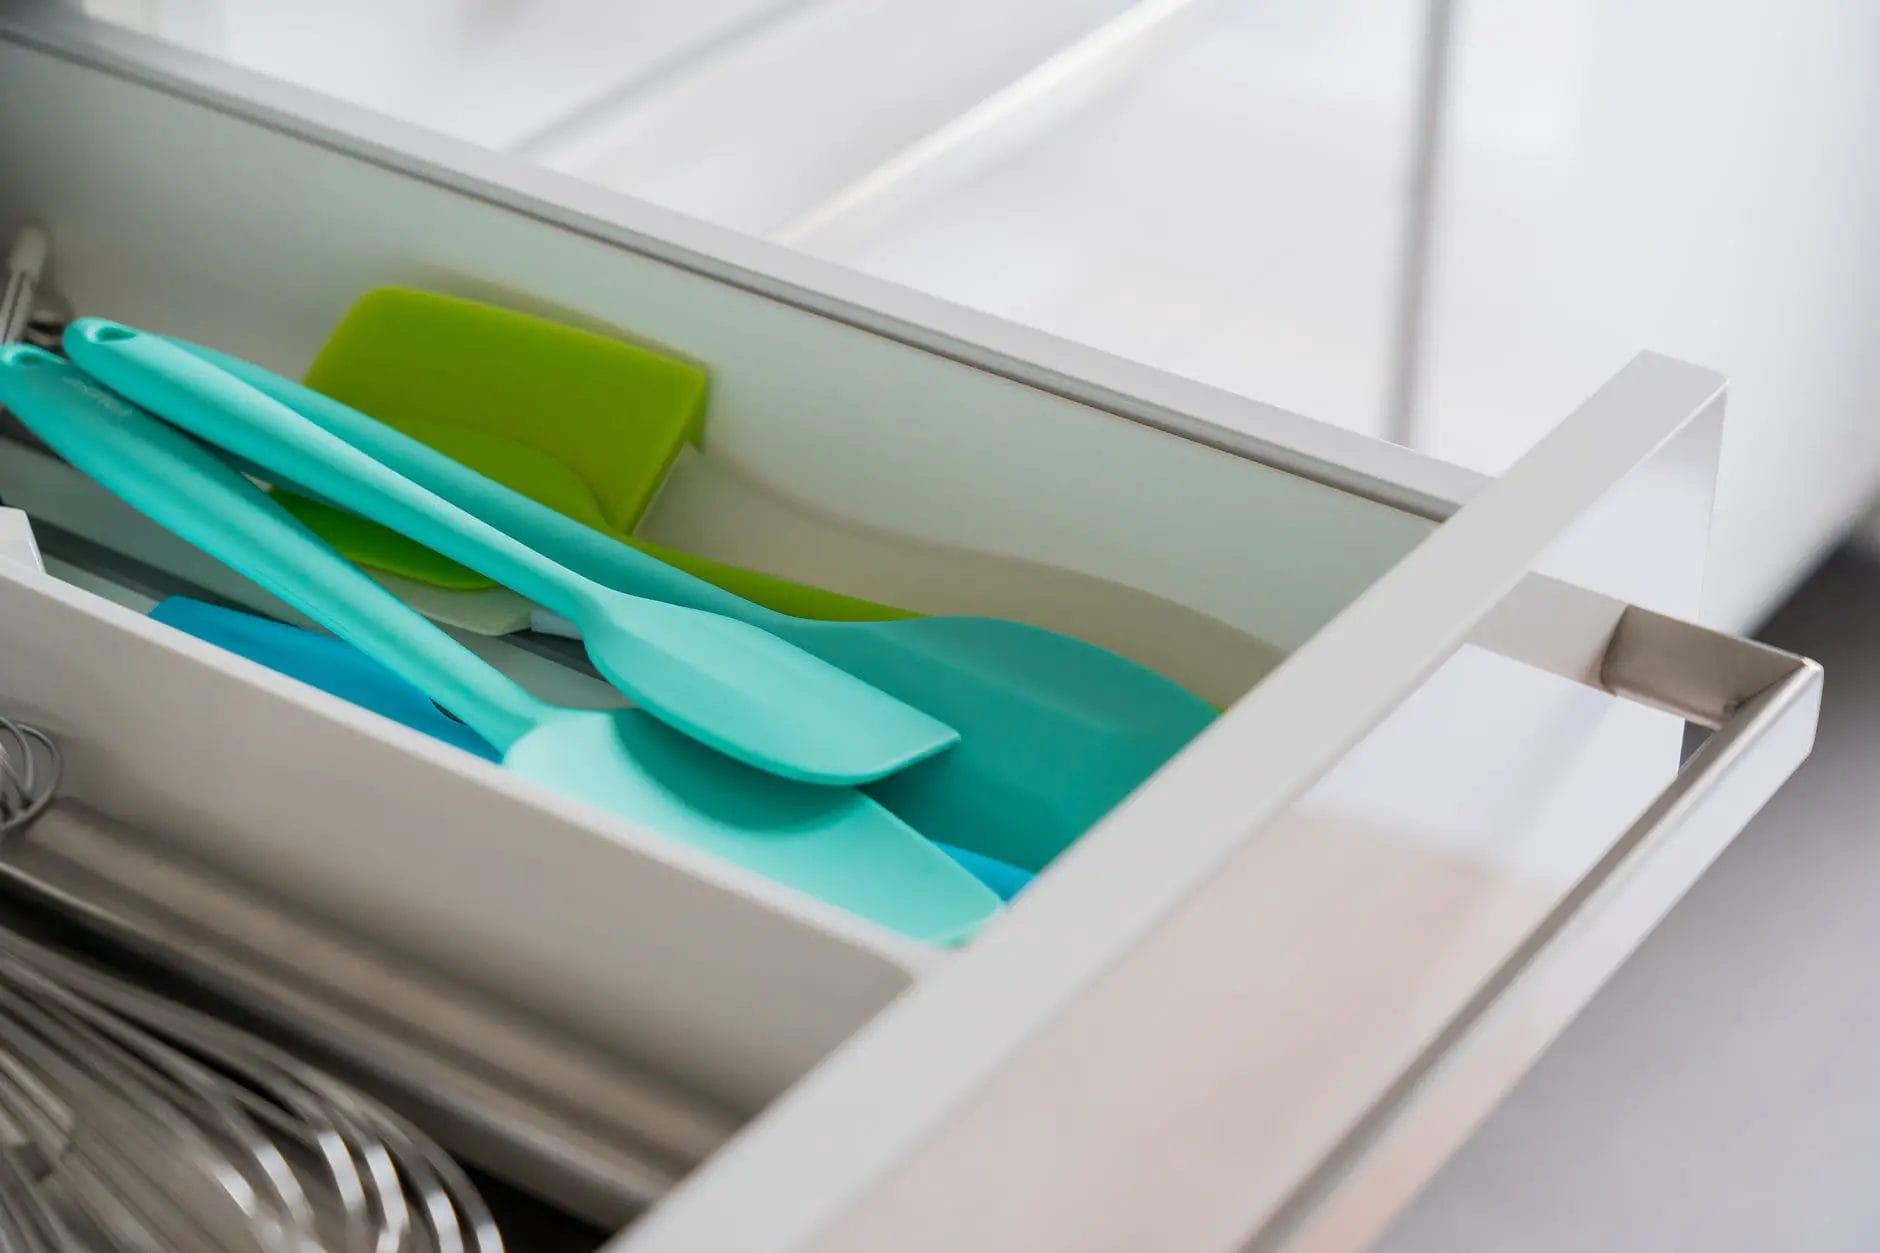 The must-have silicone kitchen utensils